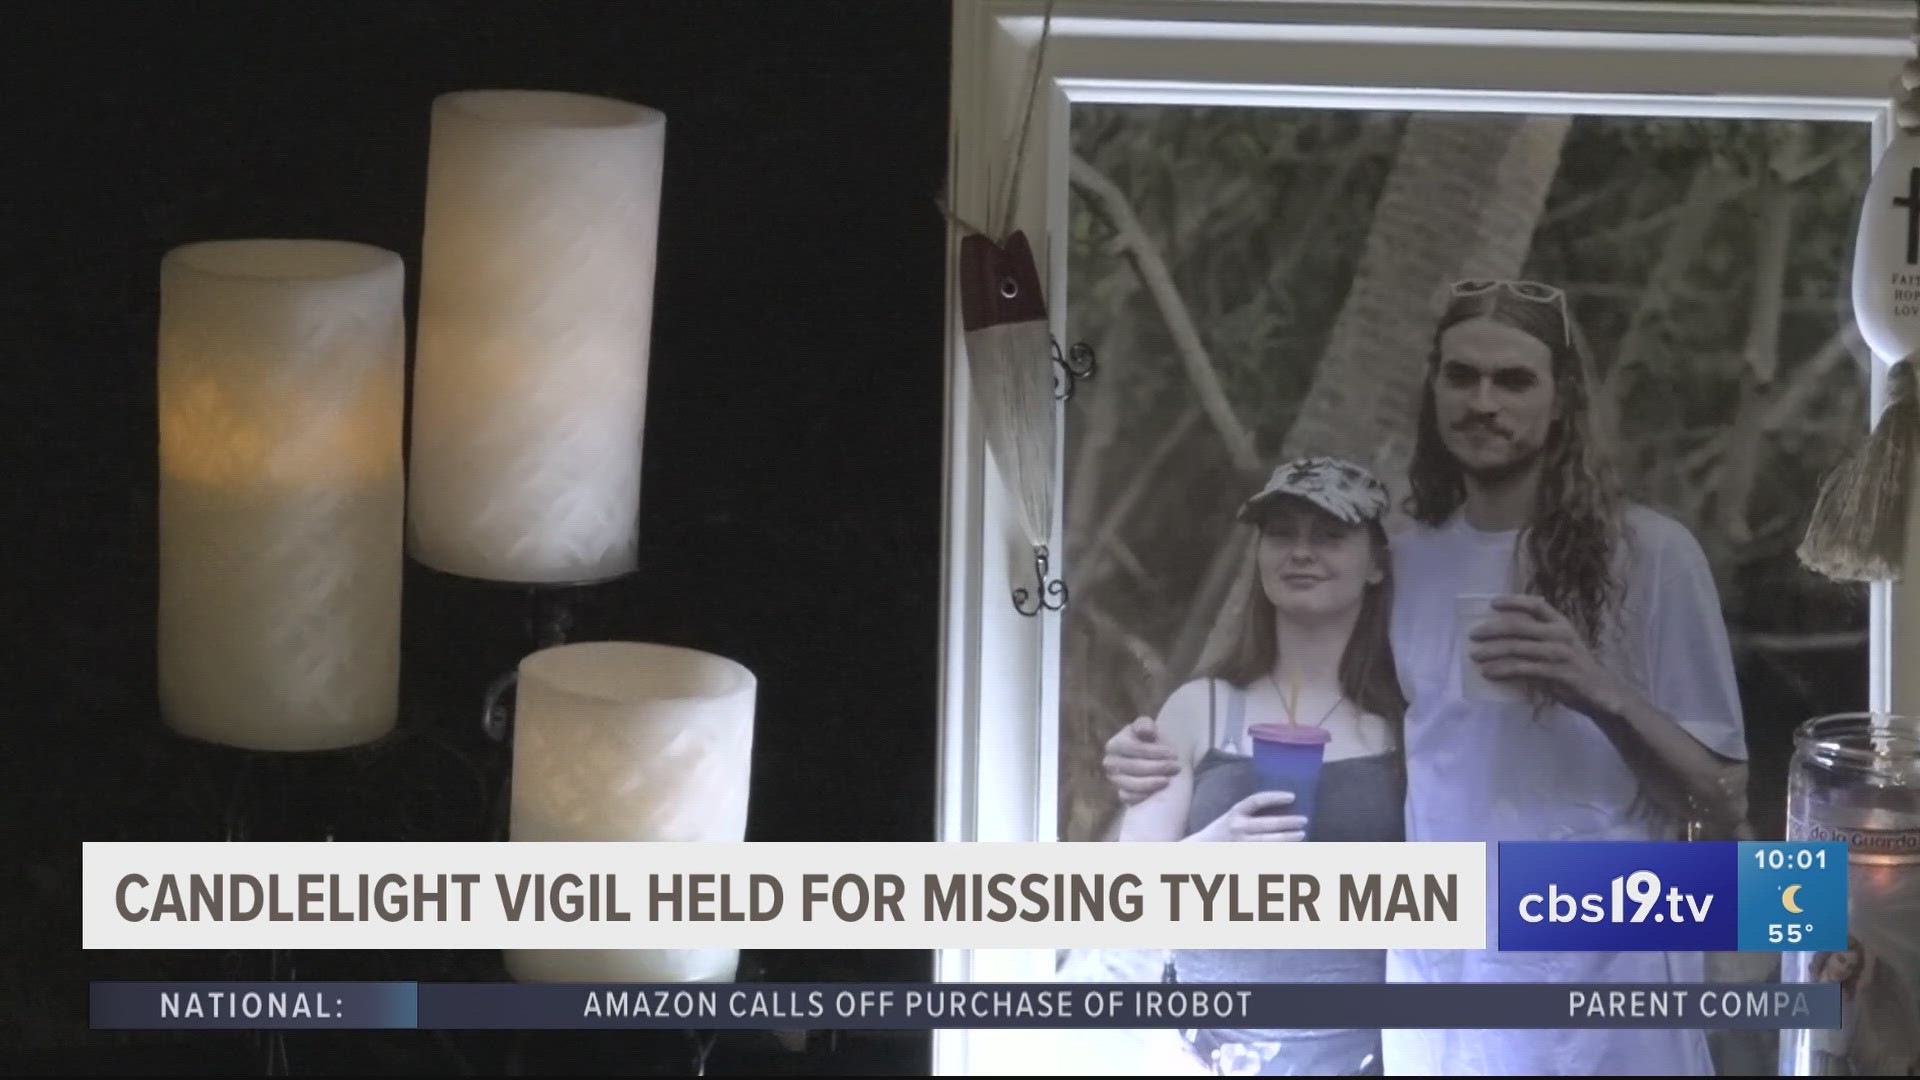 Loved ones hold candlelight vigil for missing 29-year-old Tyler man